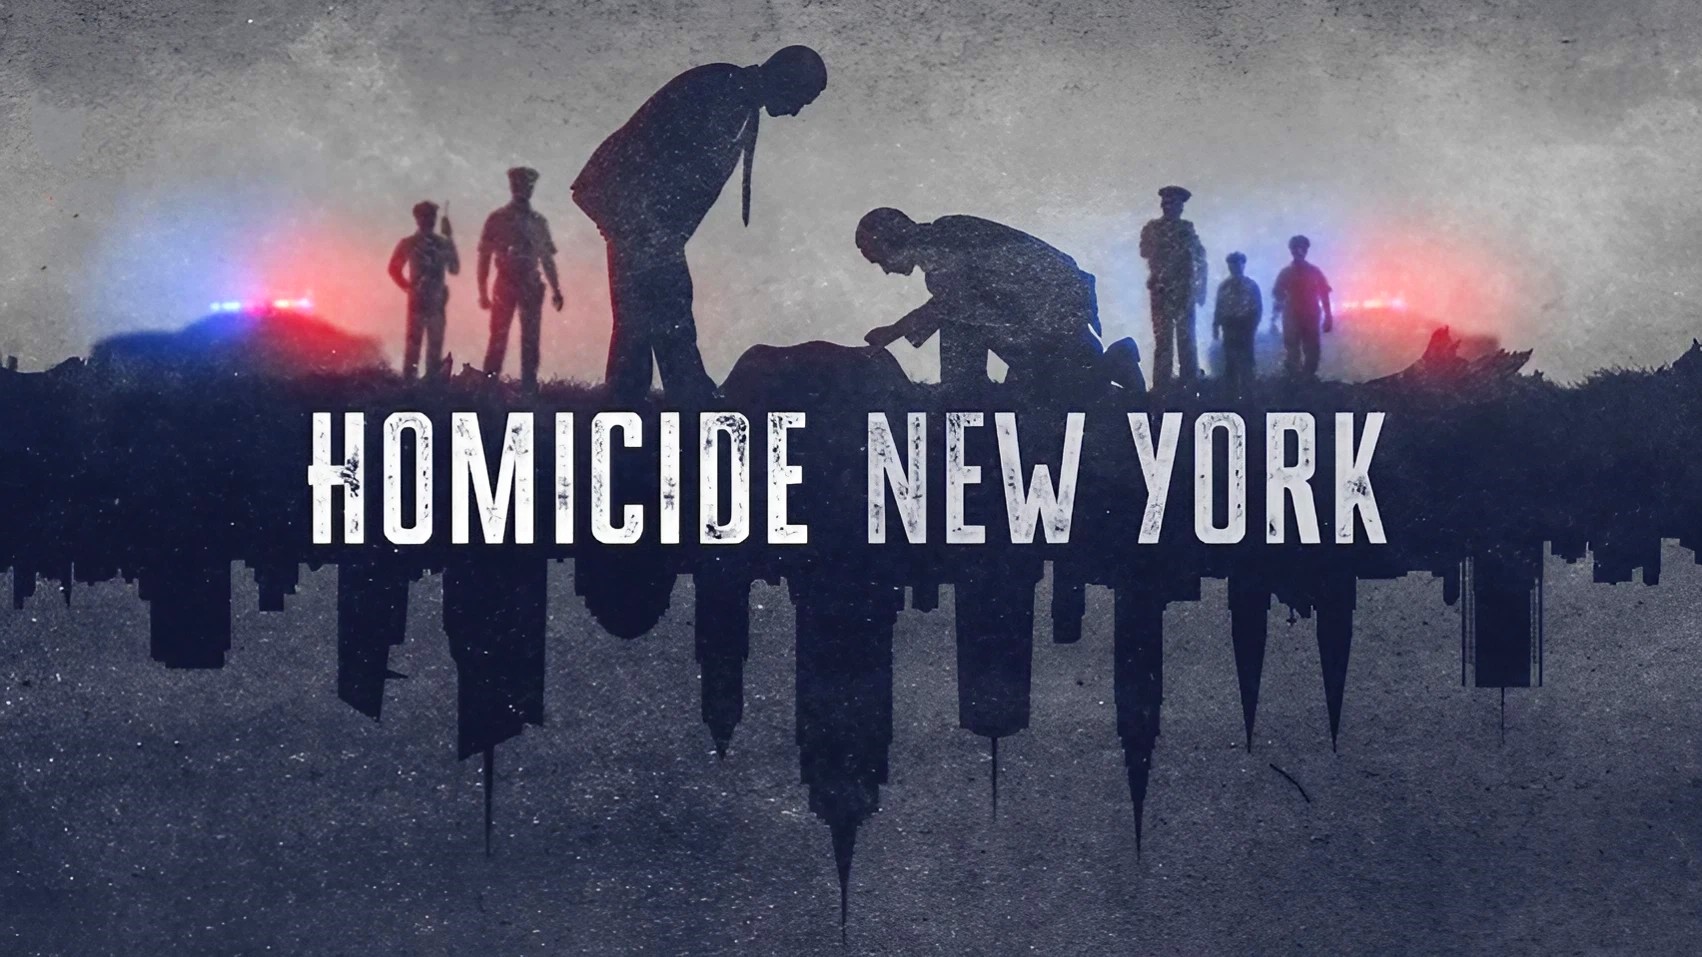 Is homicide new york based on a true story